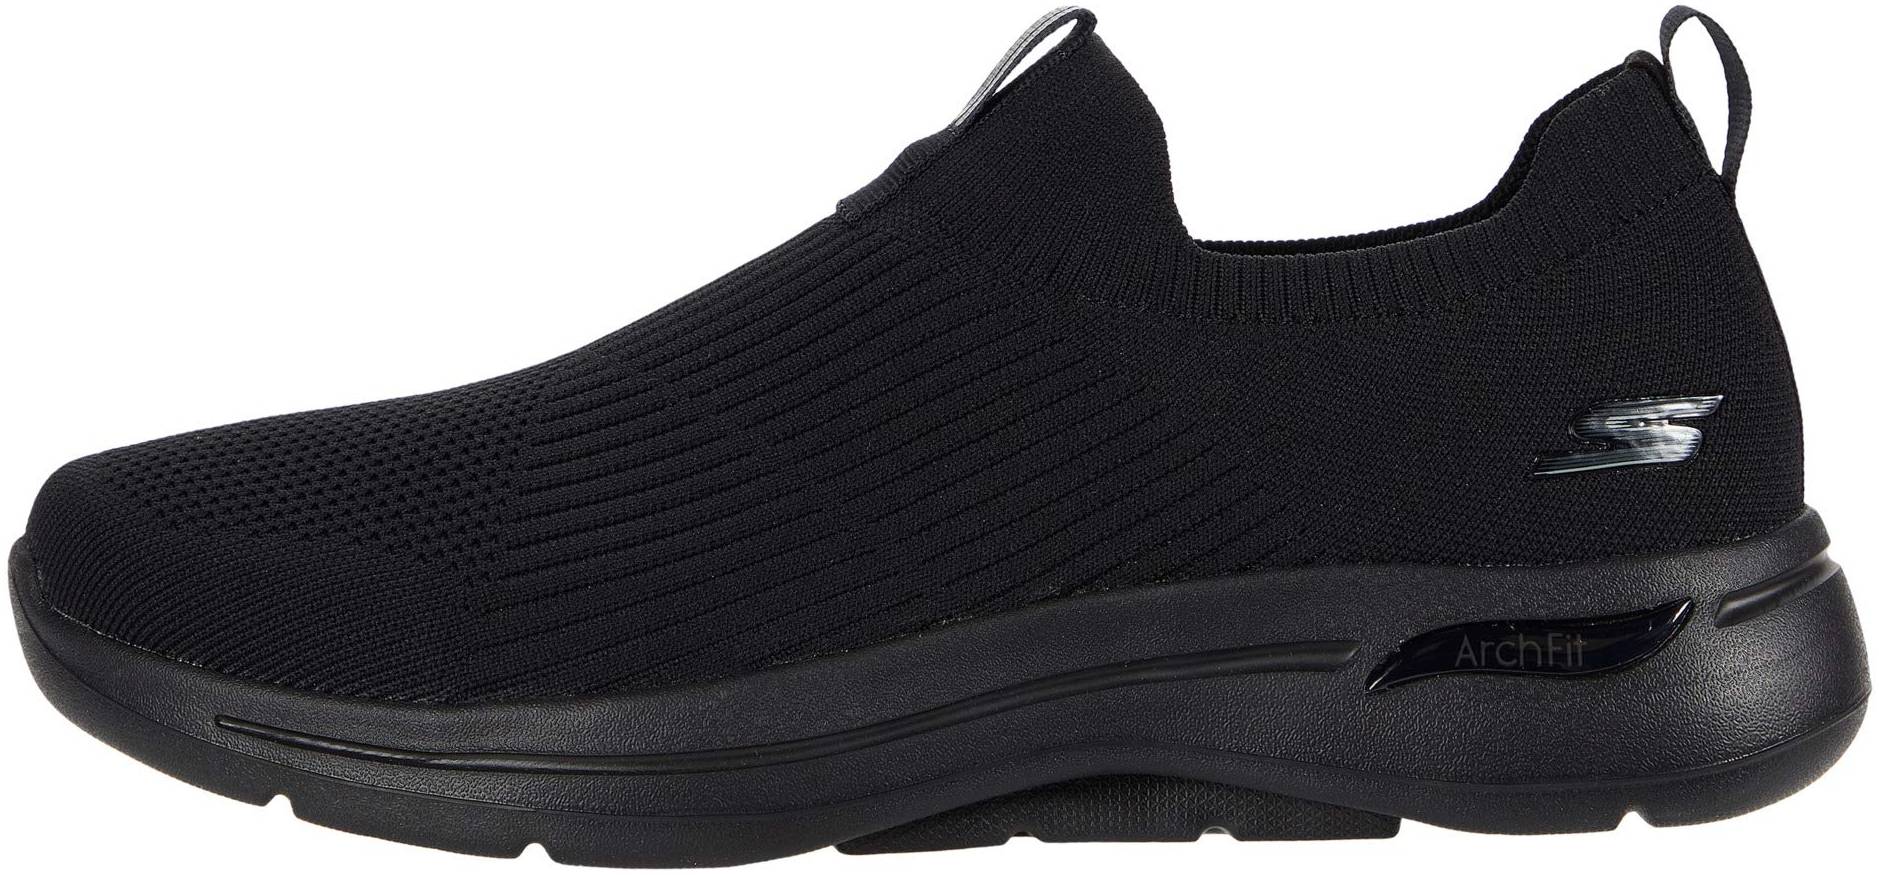 20+ Skechers walking shoes: Save up to 